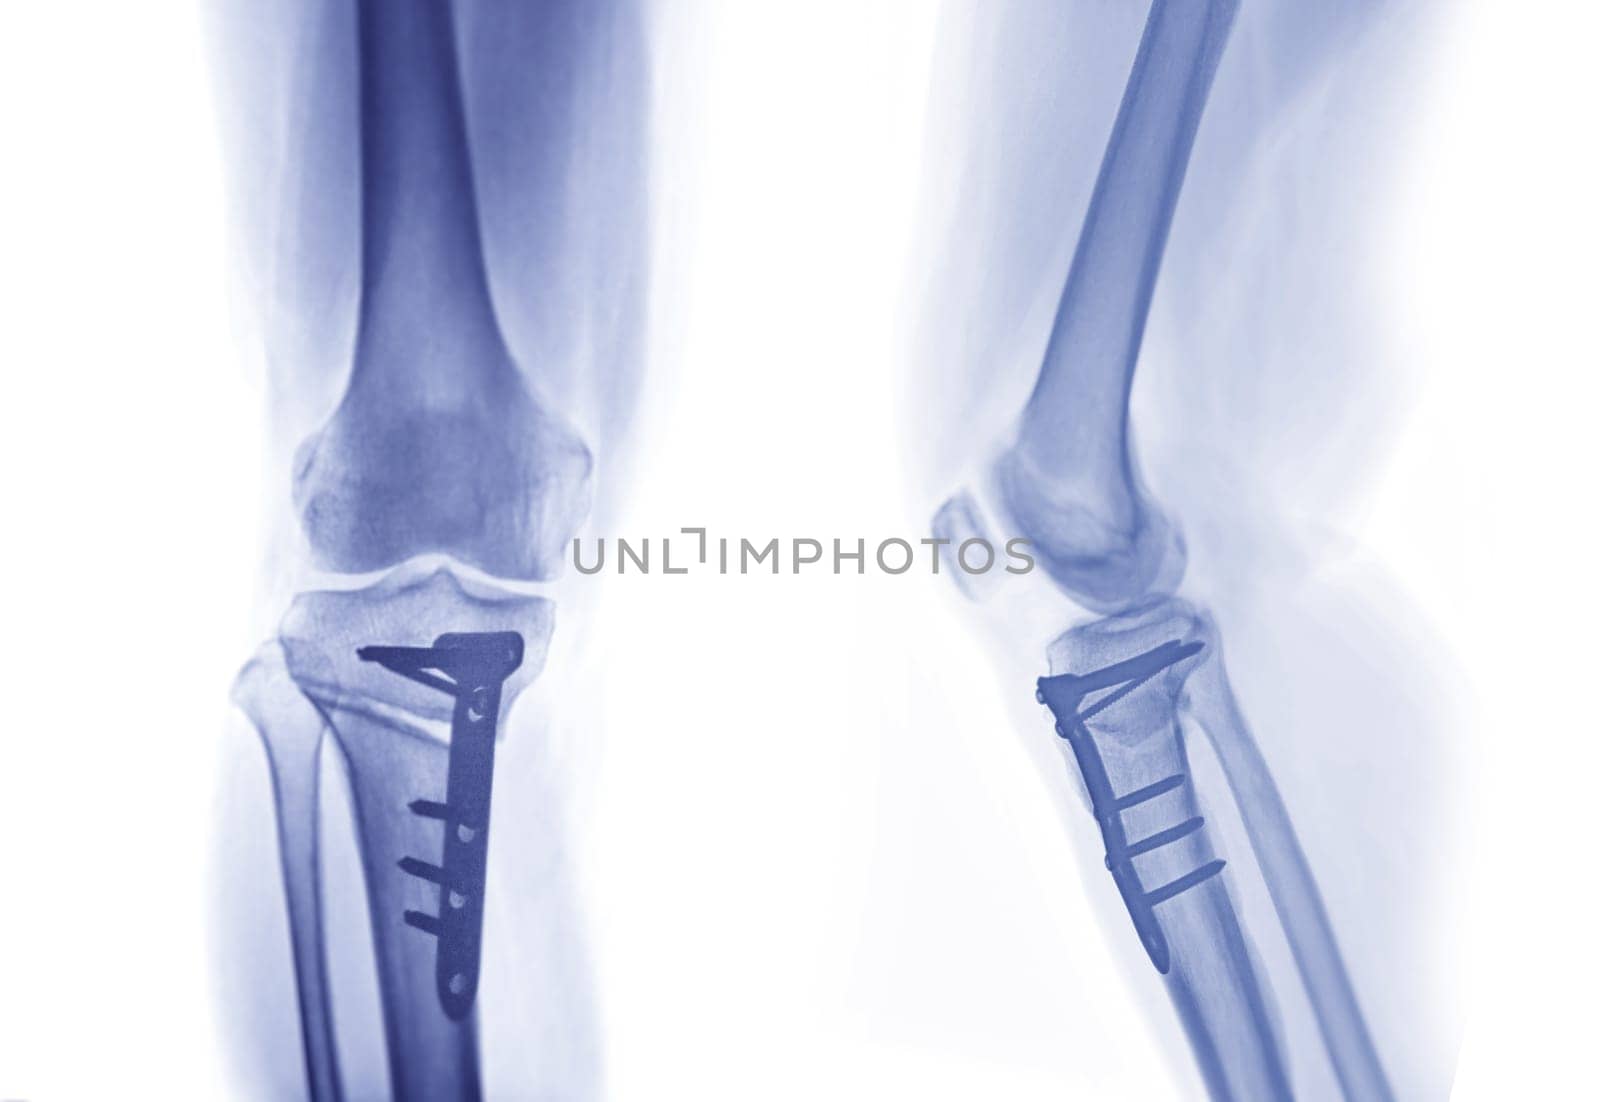 x-ray image of  Right knee  AP and Lateral view showing Total knee arthroplasty and fractures of the tibial plateau with plate and screw fixation.